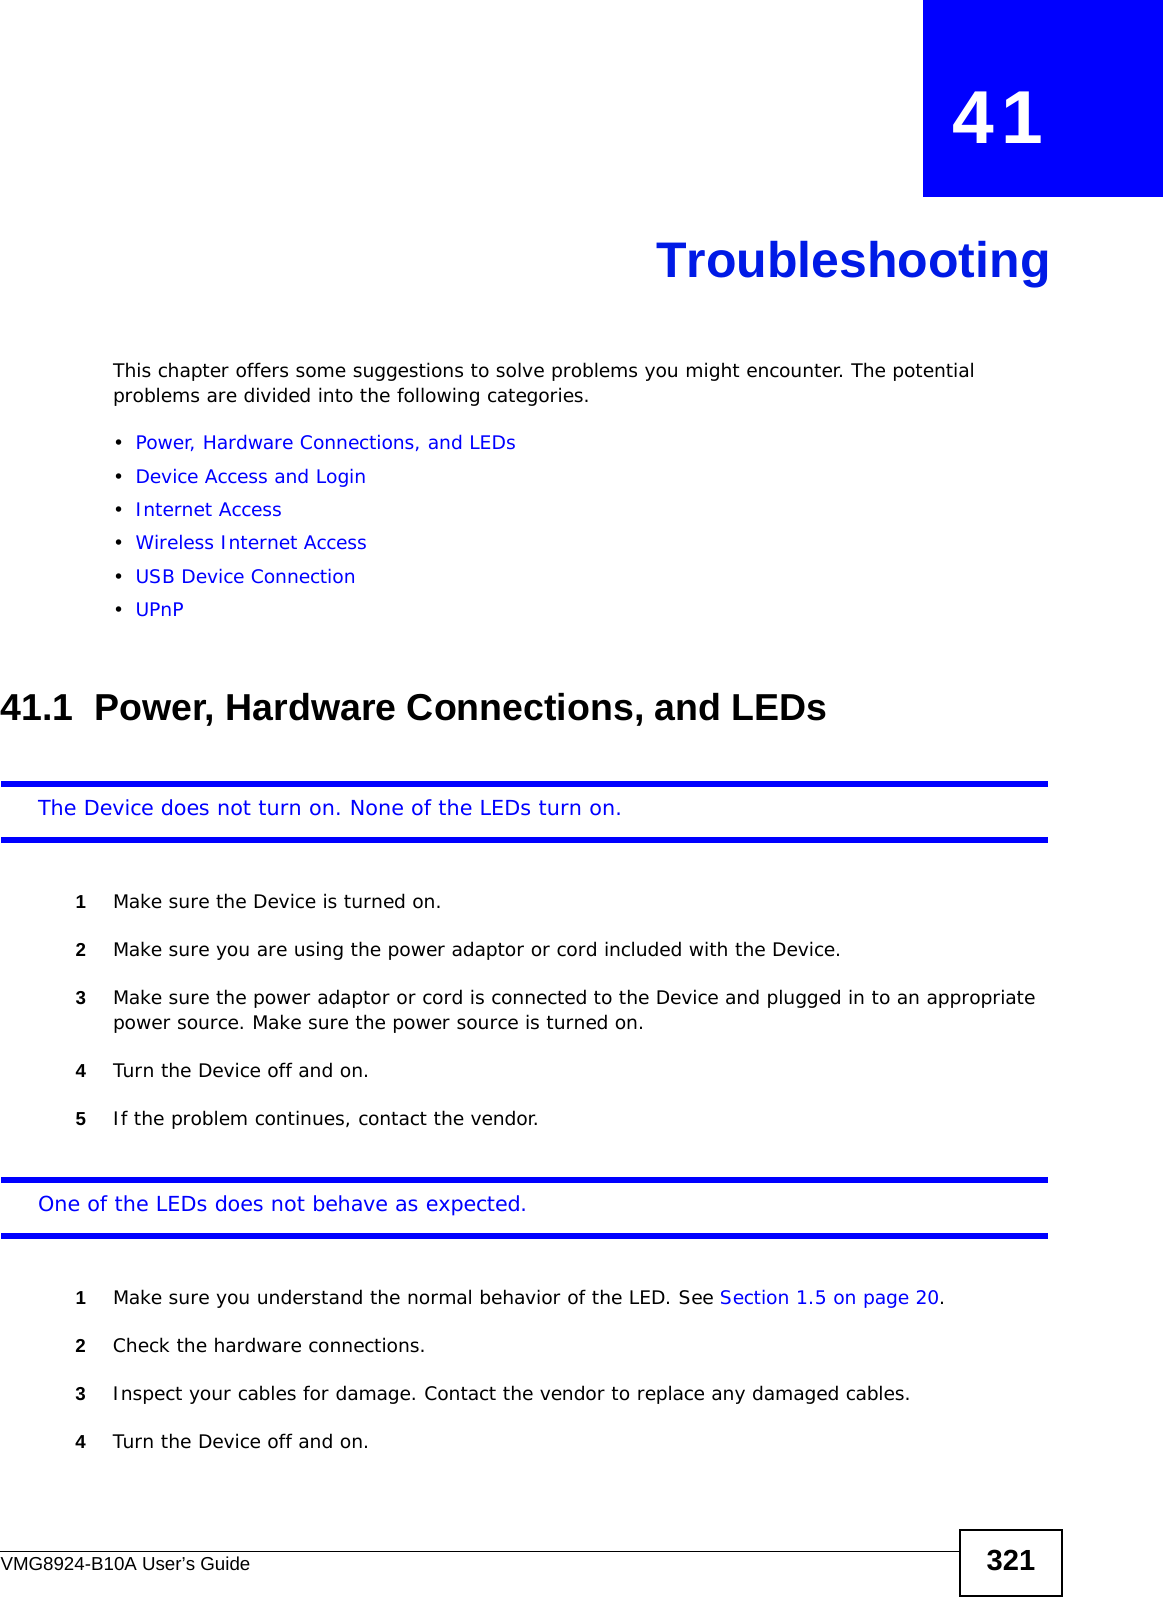 VMG8924-B10A User’s Guide 321CHAPTER   41TroubleshootingThis chapter offers some suggestions to solve problems you might encounter. The potential problems are divided into the following categories. •Power, Hardware Connections, and LEDs•Device Access and Login•Internet Access•Wireless Internet Access•USB Device Connection•UPnP41.1  Power, Hardware Connections, and LEDsThe Device does not turn on. None of the LEDs turn on.1Make sure the Device is turned on. 2Make sure you are using the power adaptor or cord included with the Device.3Make sure the power adaptor or cord is connected to the Device and plugged in to an appropriate power source. Make sure the power source is turned on.4Turn the Device off and on.5If the problem continues, contact the vendor.One of the LEDs does not behave as expected.1Make sure you understand the normal behavior of the LED. See Section 1.5 on page 20.2Check the hardware connections.3Inspect your cables for damage. Contact the vendor to replace any damaged cables.4Turn the Device off and on.